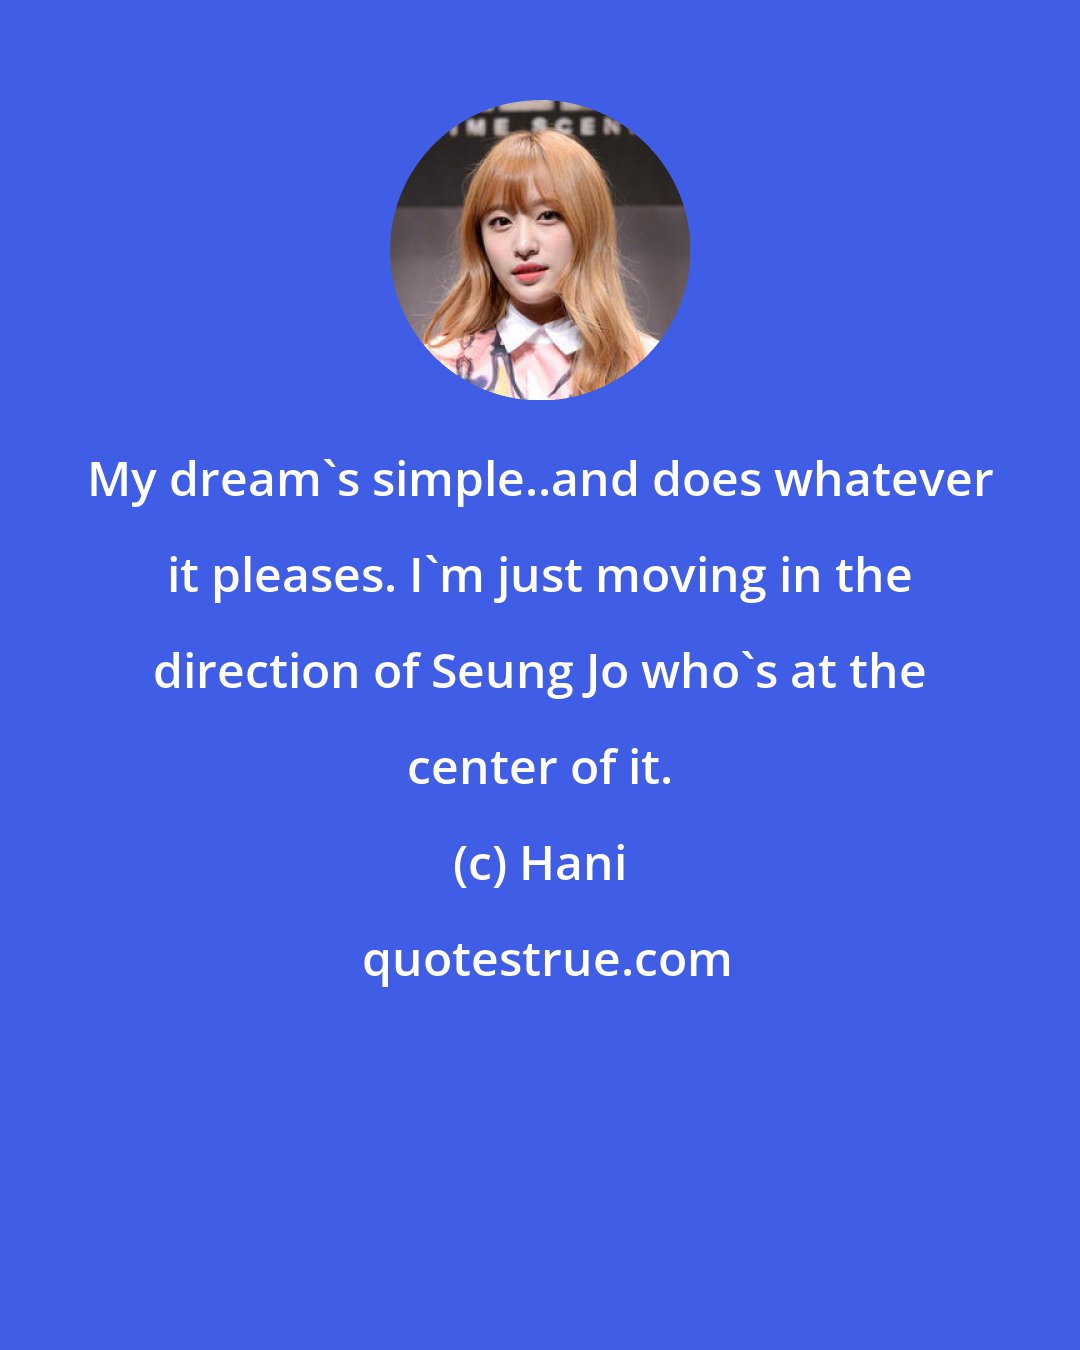 Hani: My dream's simple..and does whatever it pleases. I'm just moving in the direction of Seung Jo who's at the center of it.